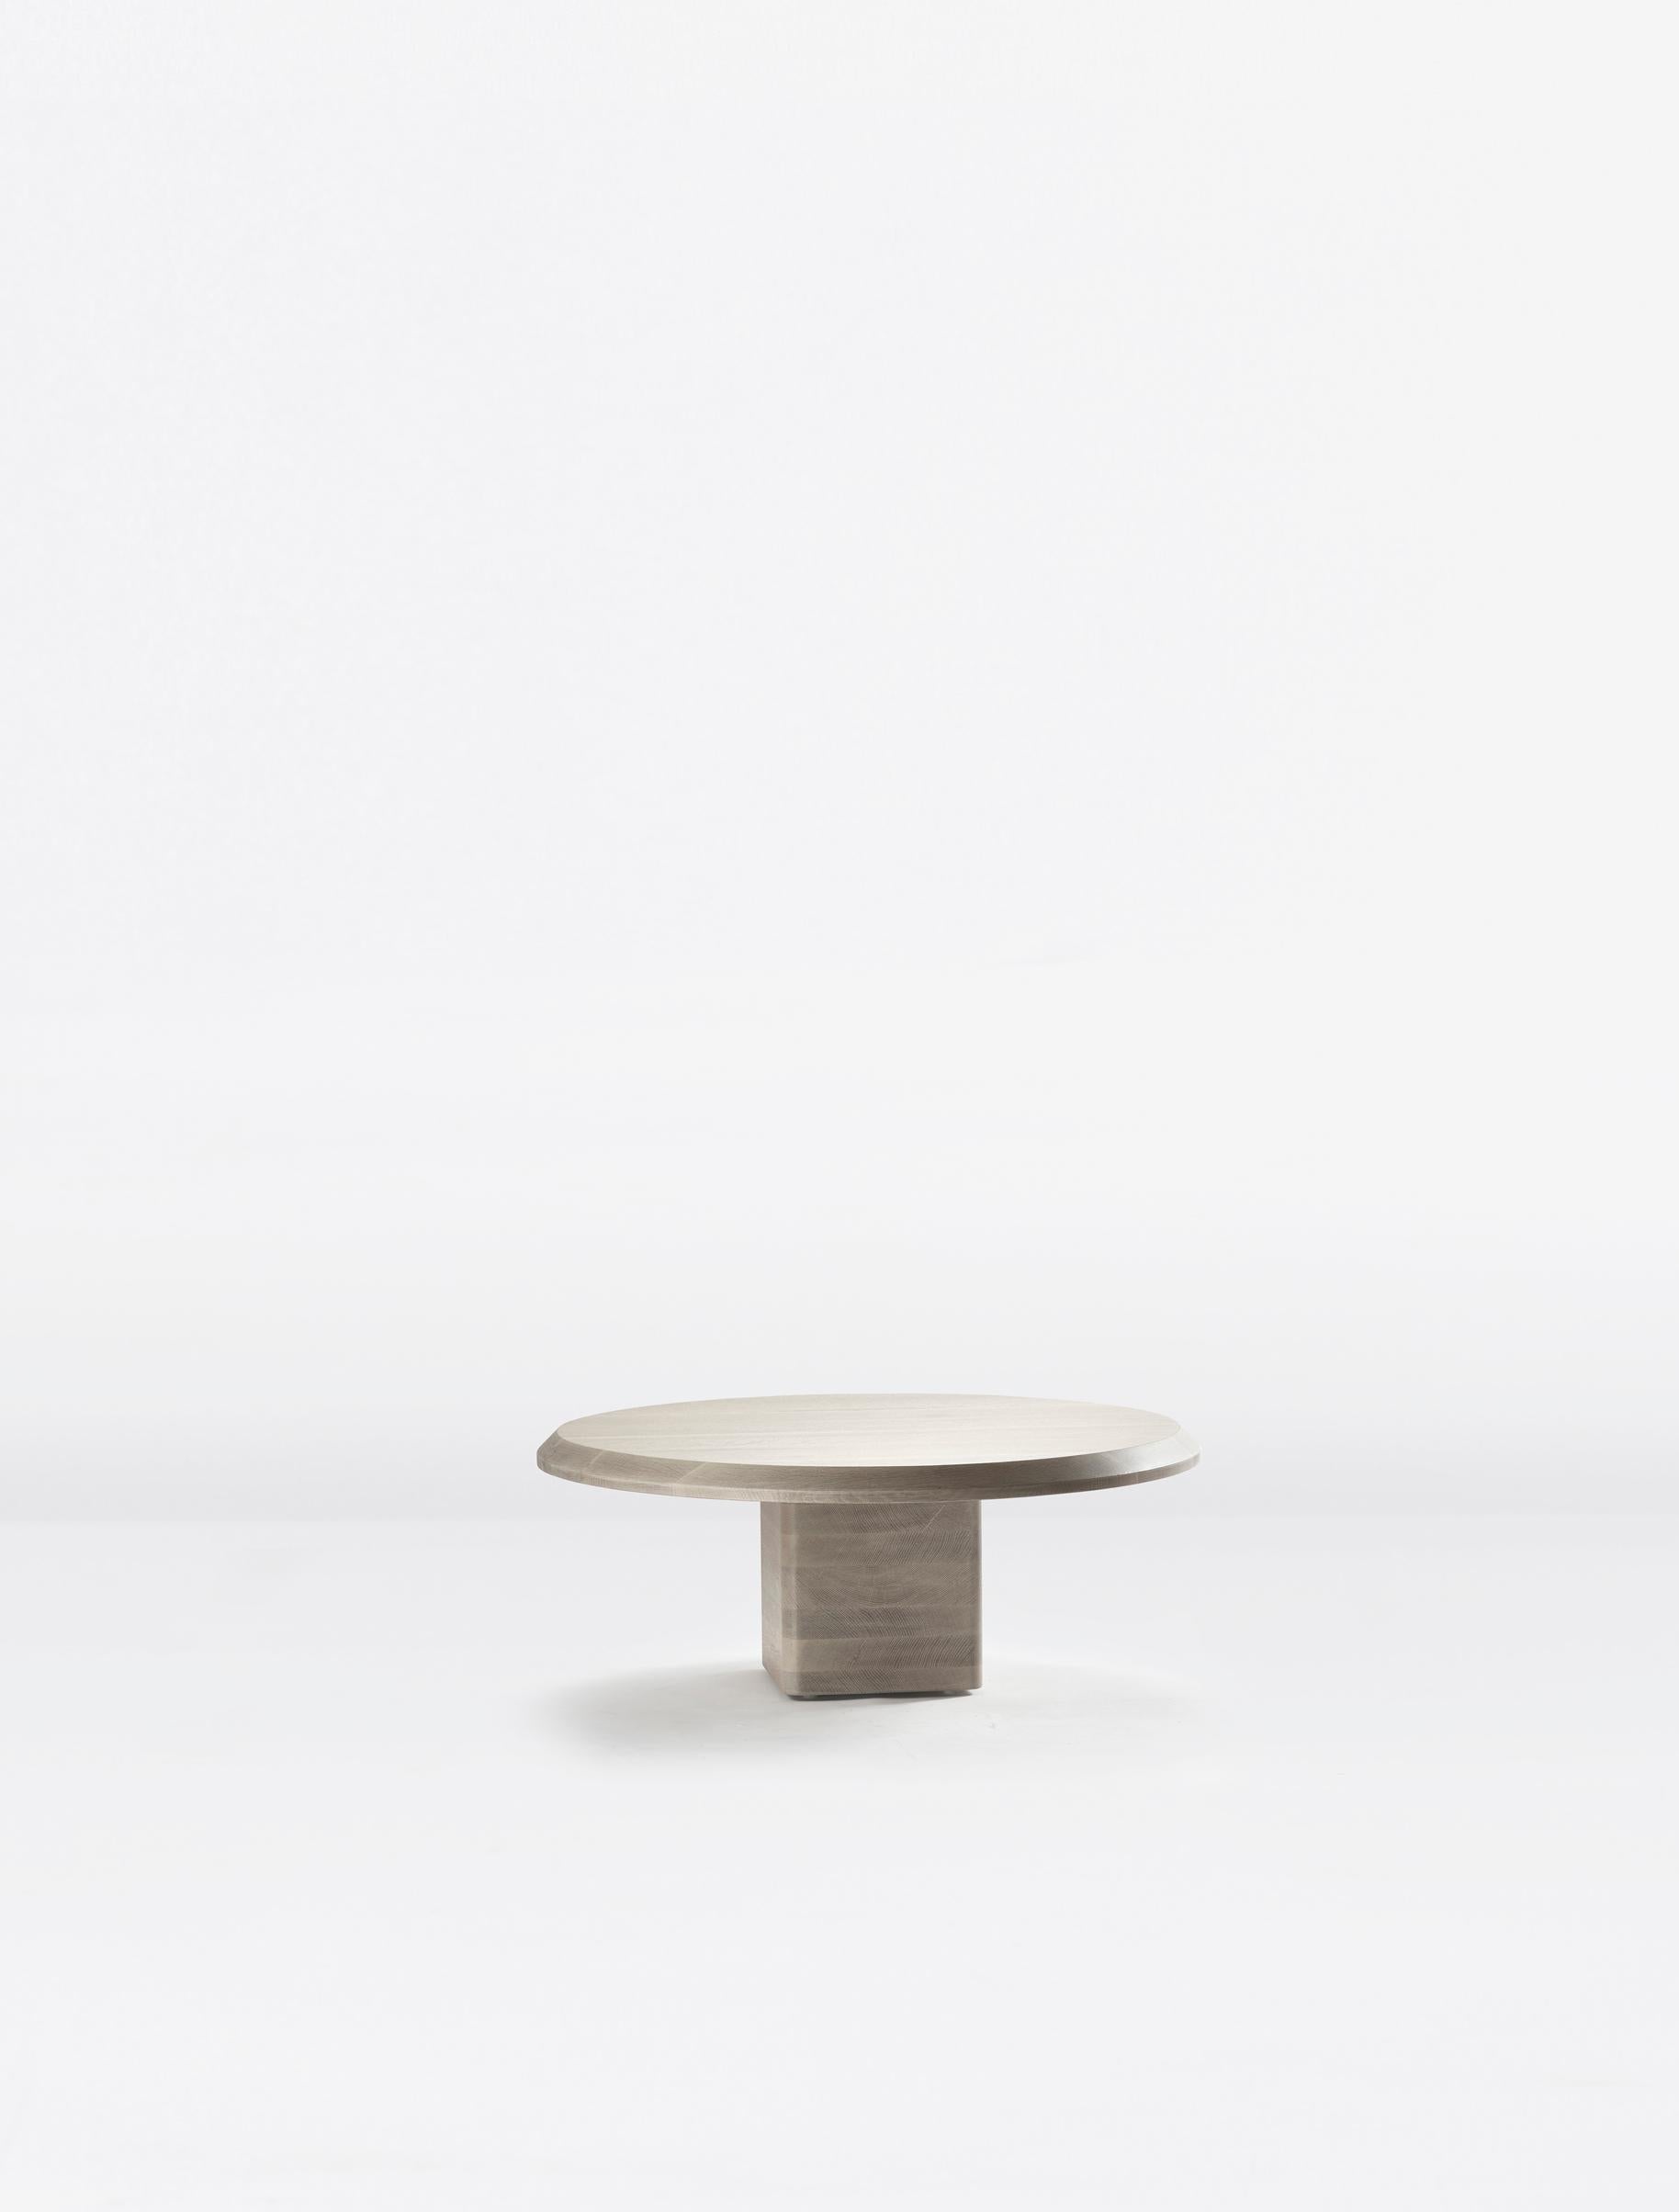 A solid wood low table with a soft radiused base and wide beveled top.

Paolo Ferrari is an internationally recognized designer and founder of Studio Paolo Ferrari, a Toronto-based, multi-disciplinary design studio, with a focus on interiors and